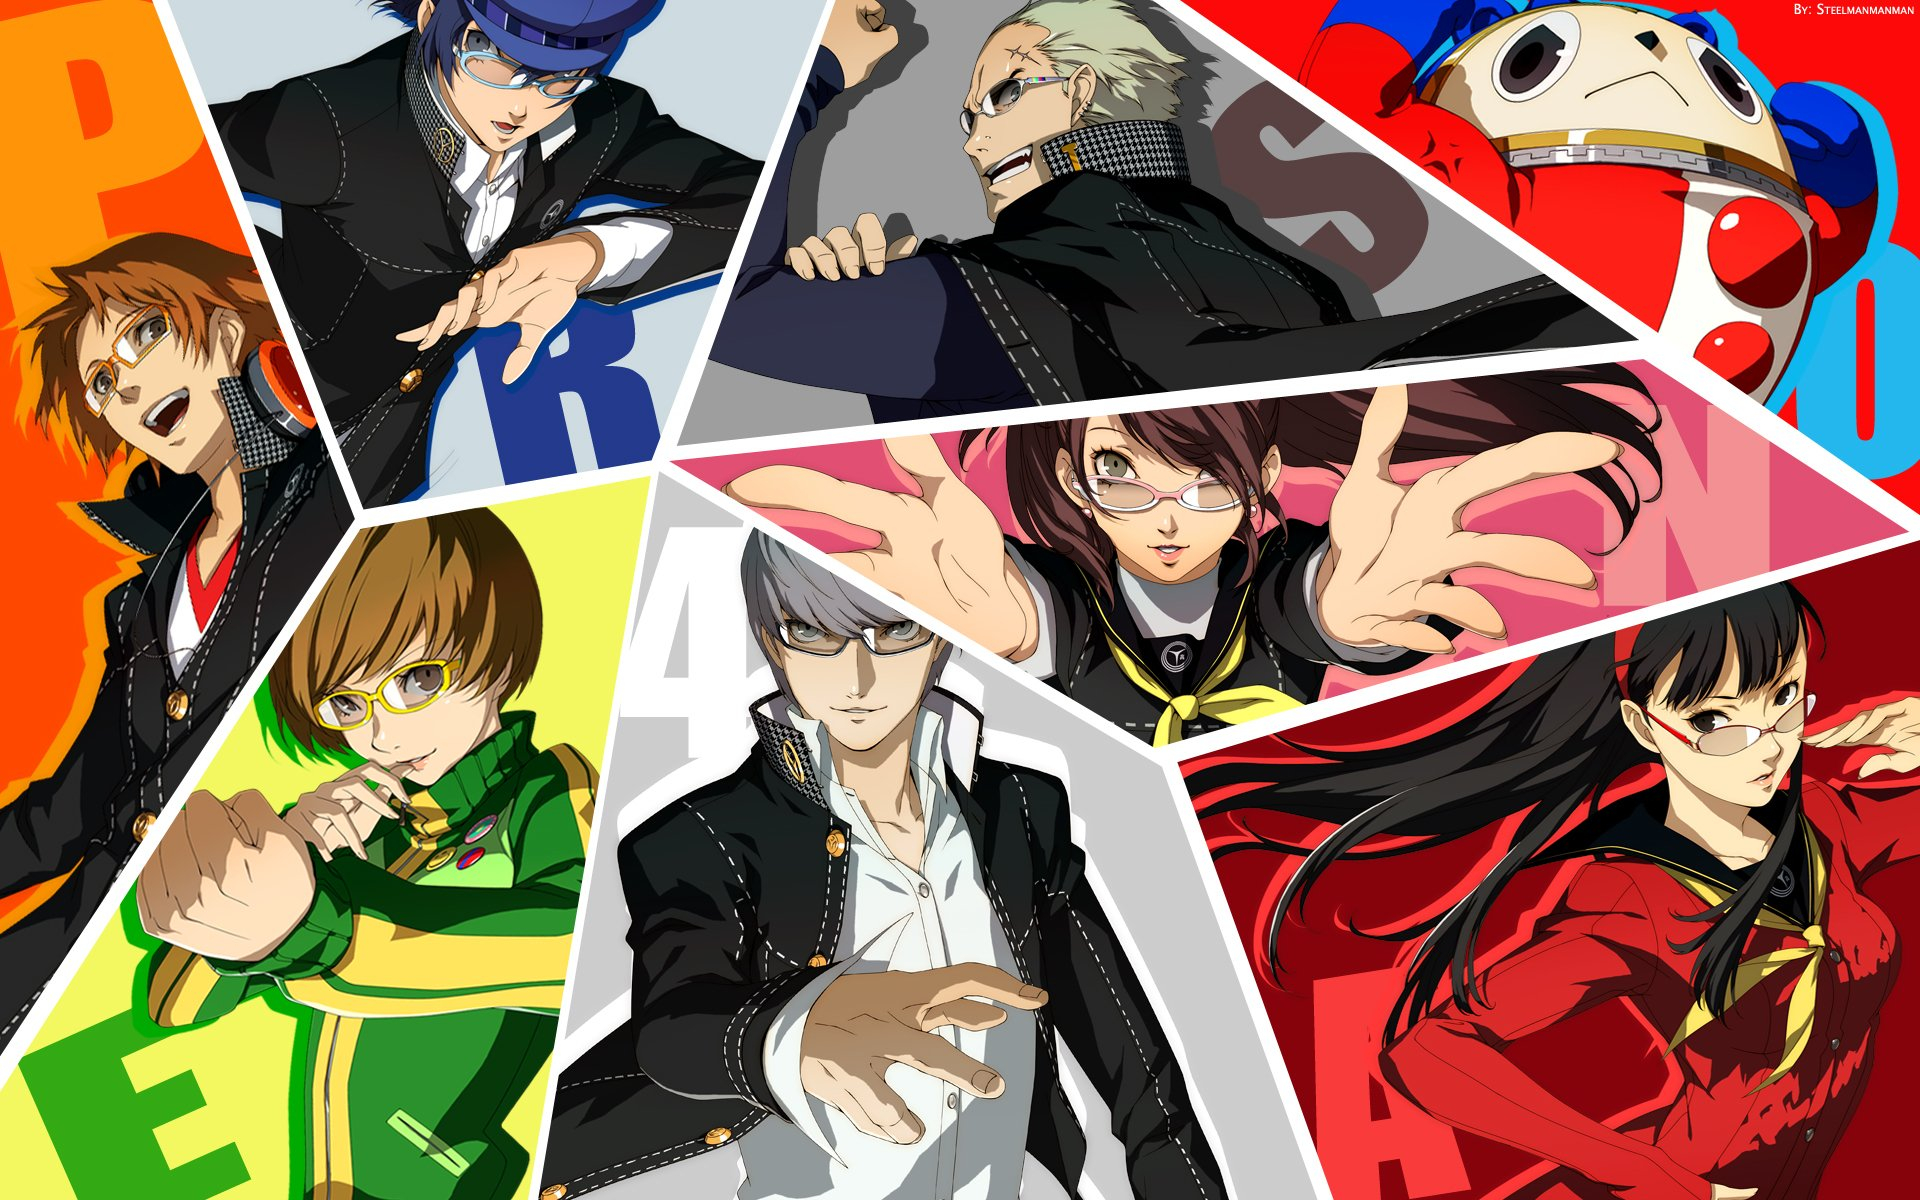 1920x1200 140+ Persona 4 HD Wallpapers and Backgrounds